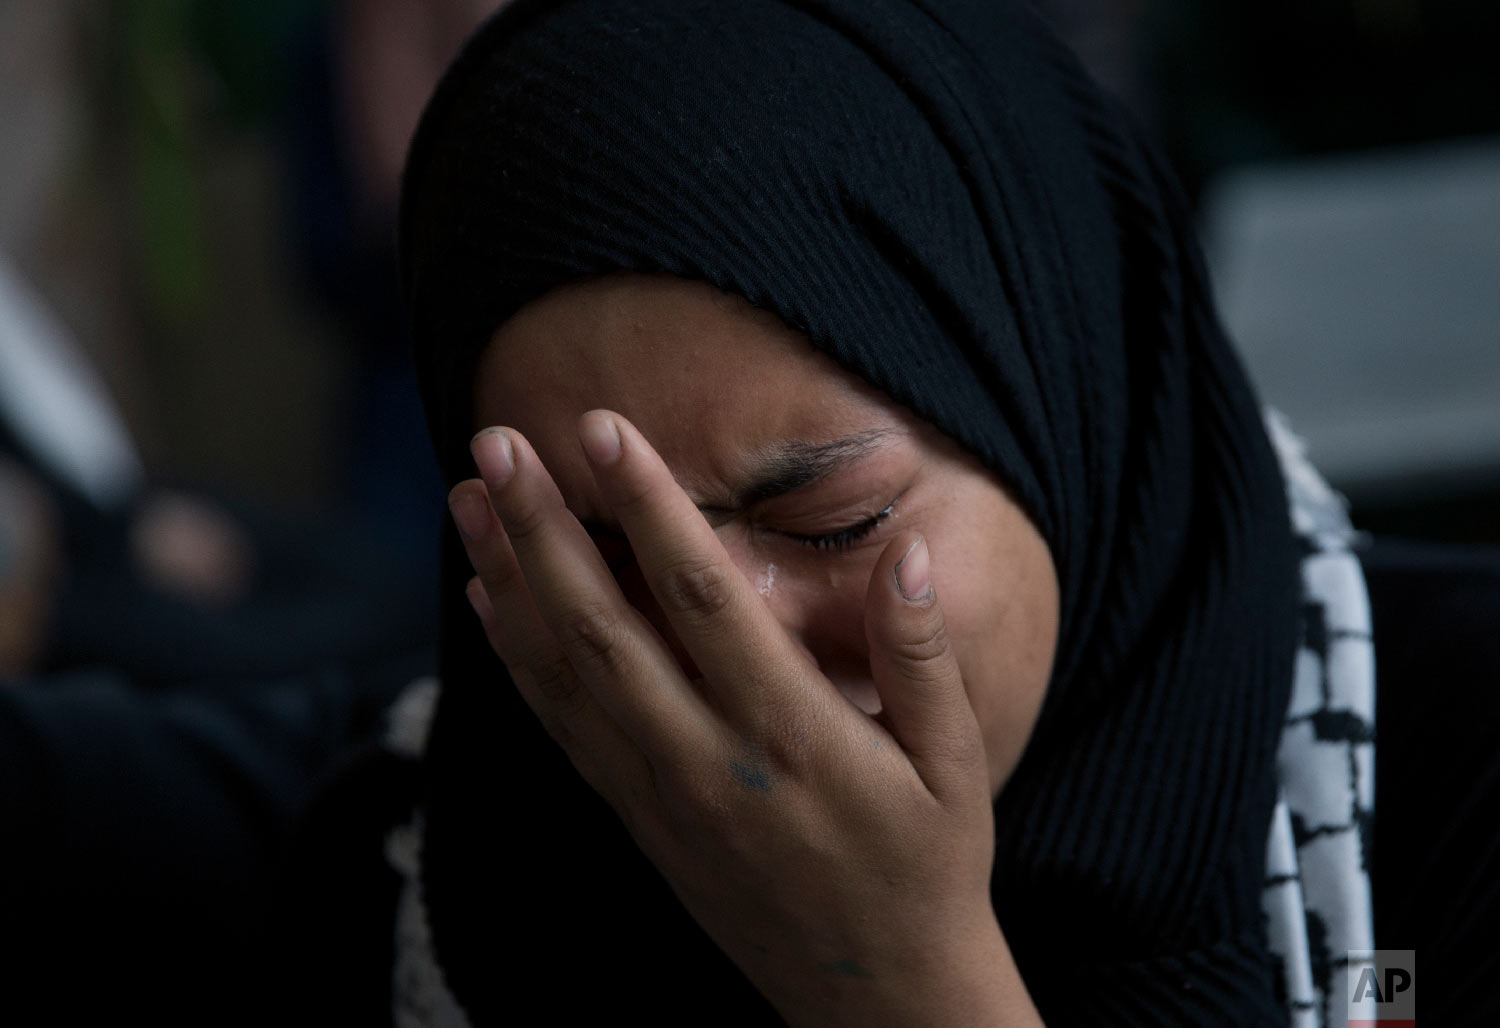  A woman weeps during the funeral of Palestinian Yasin Saradeeh, 33, who was killed by Israeli soldiers during an army raid in Jericho on February 22, 2018, in the West Bank city of Jericho, Thursday, March 29, 2018. (AP Photo/Nasser Nasser) 